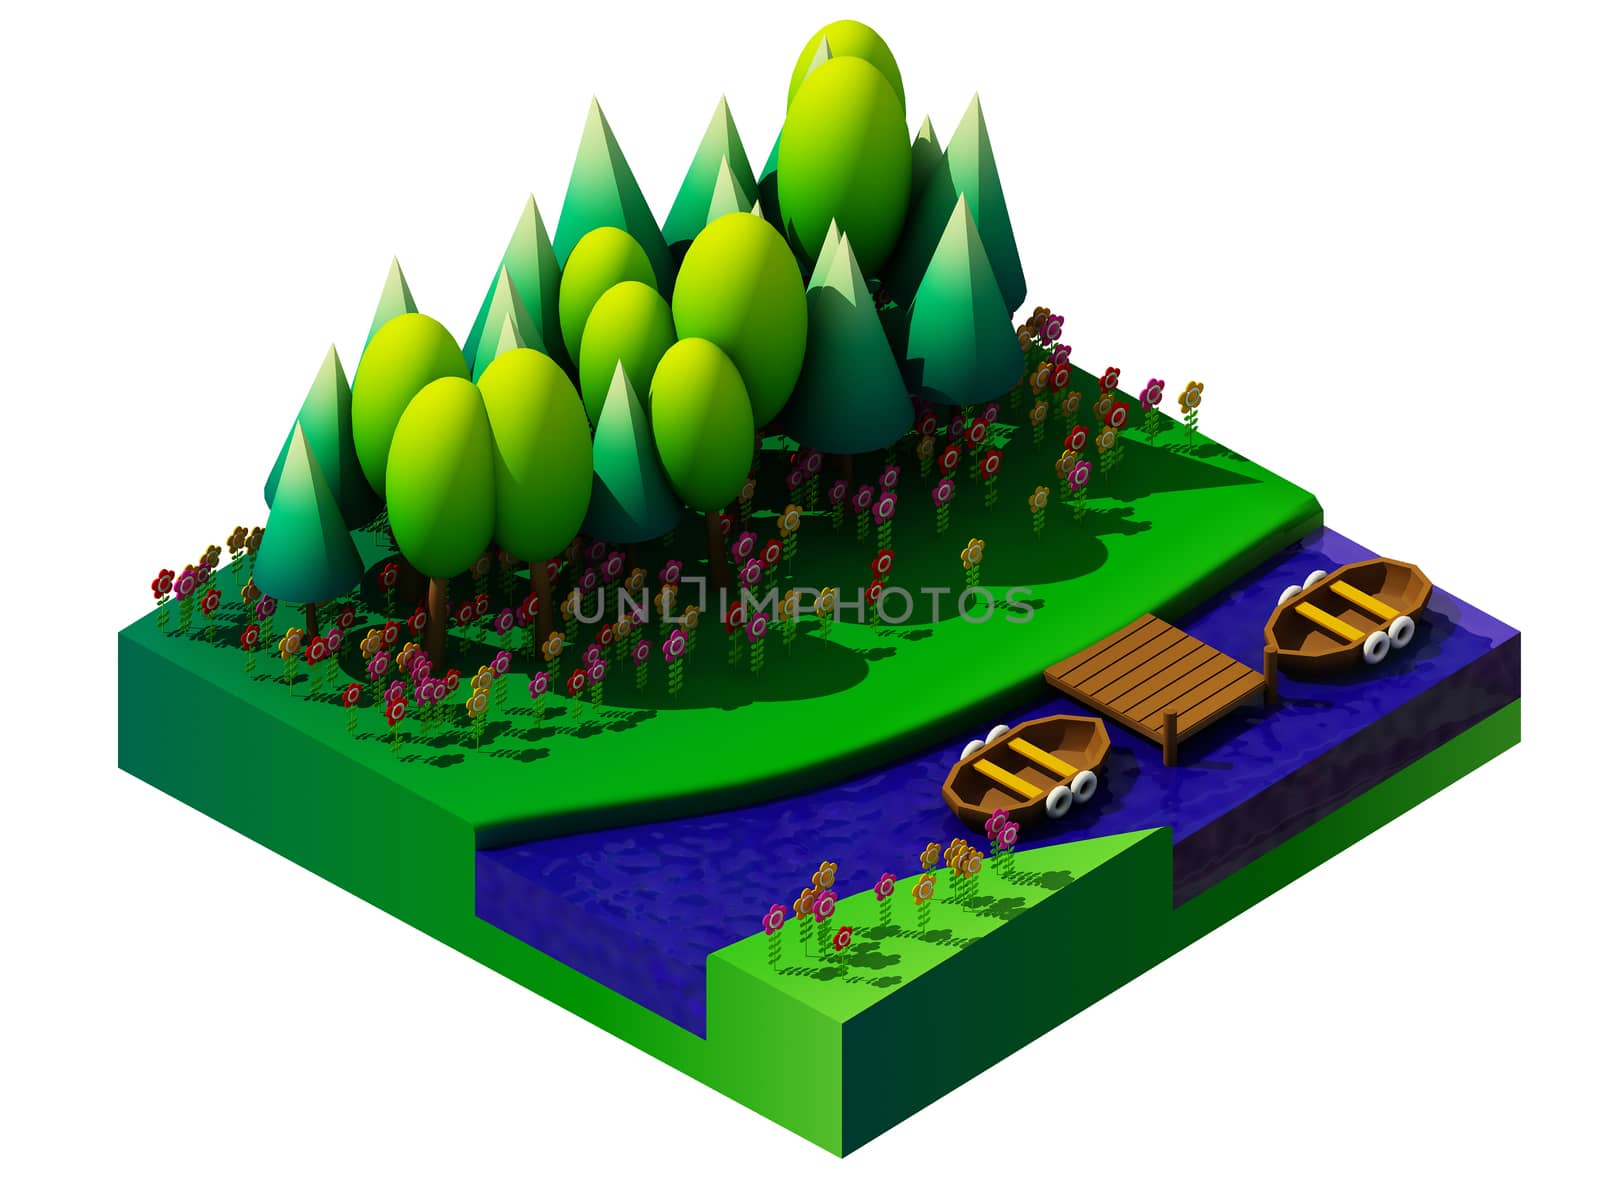 isometric nature and landscape